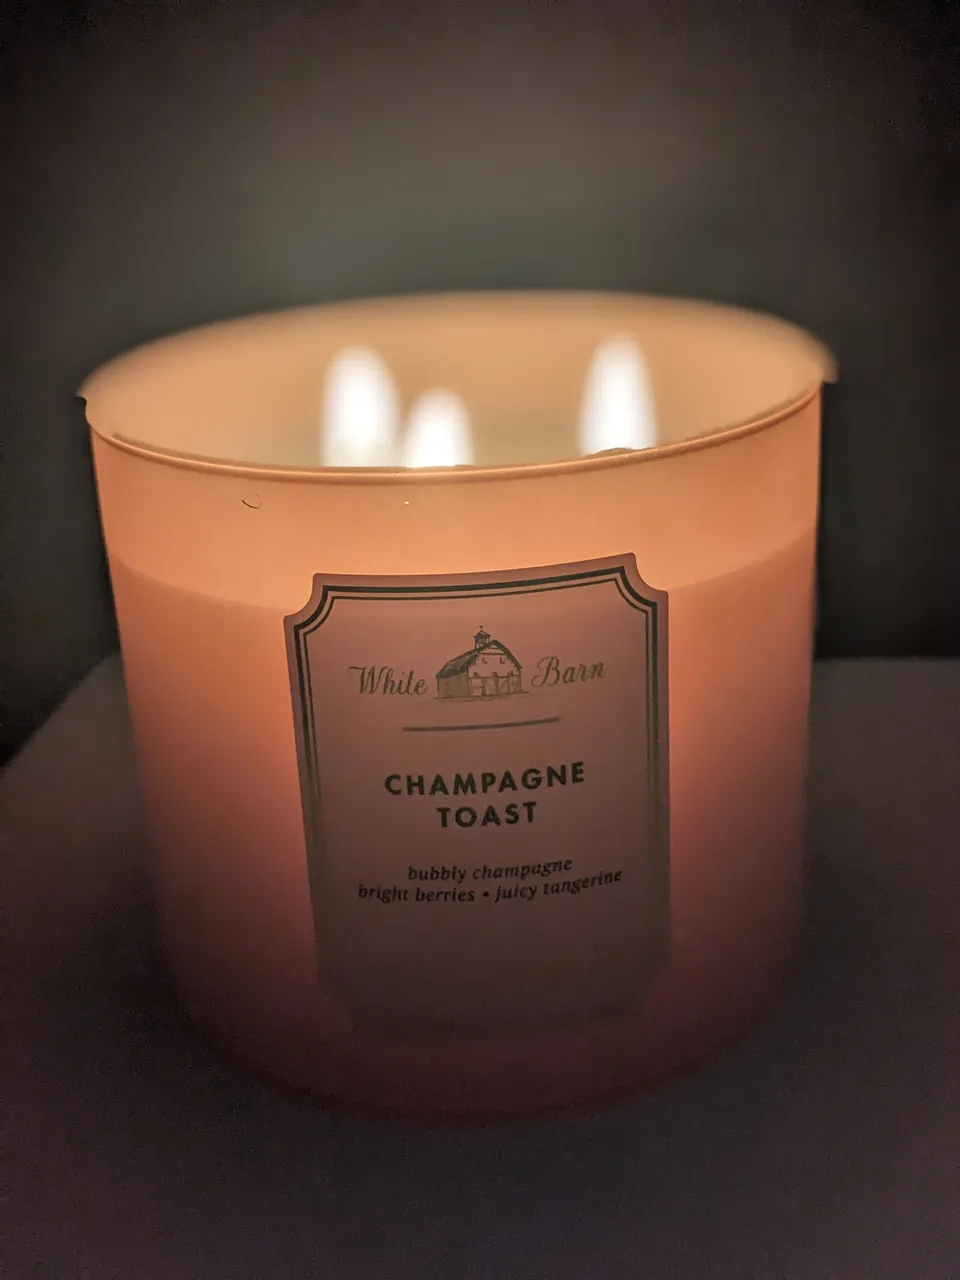 Bath and Body Works Champagne Toast Candle